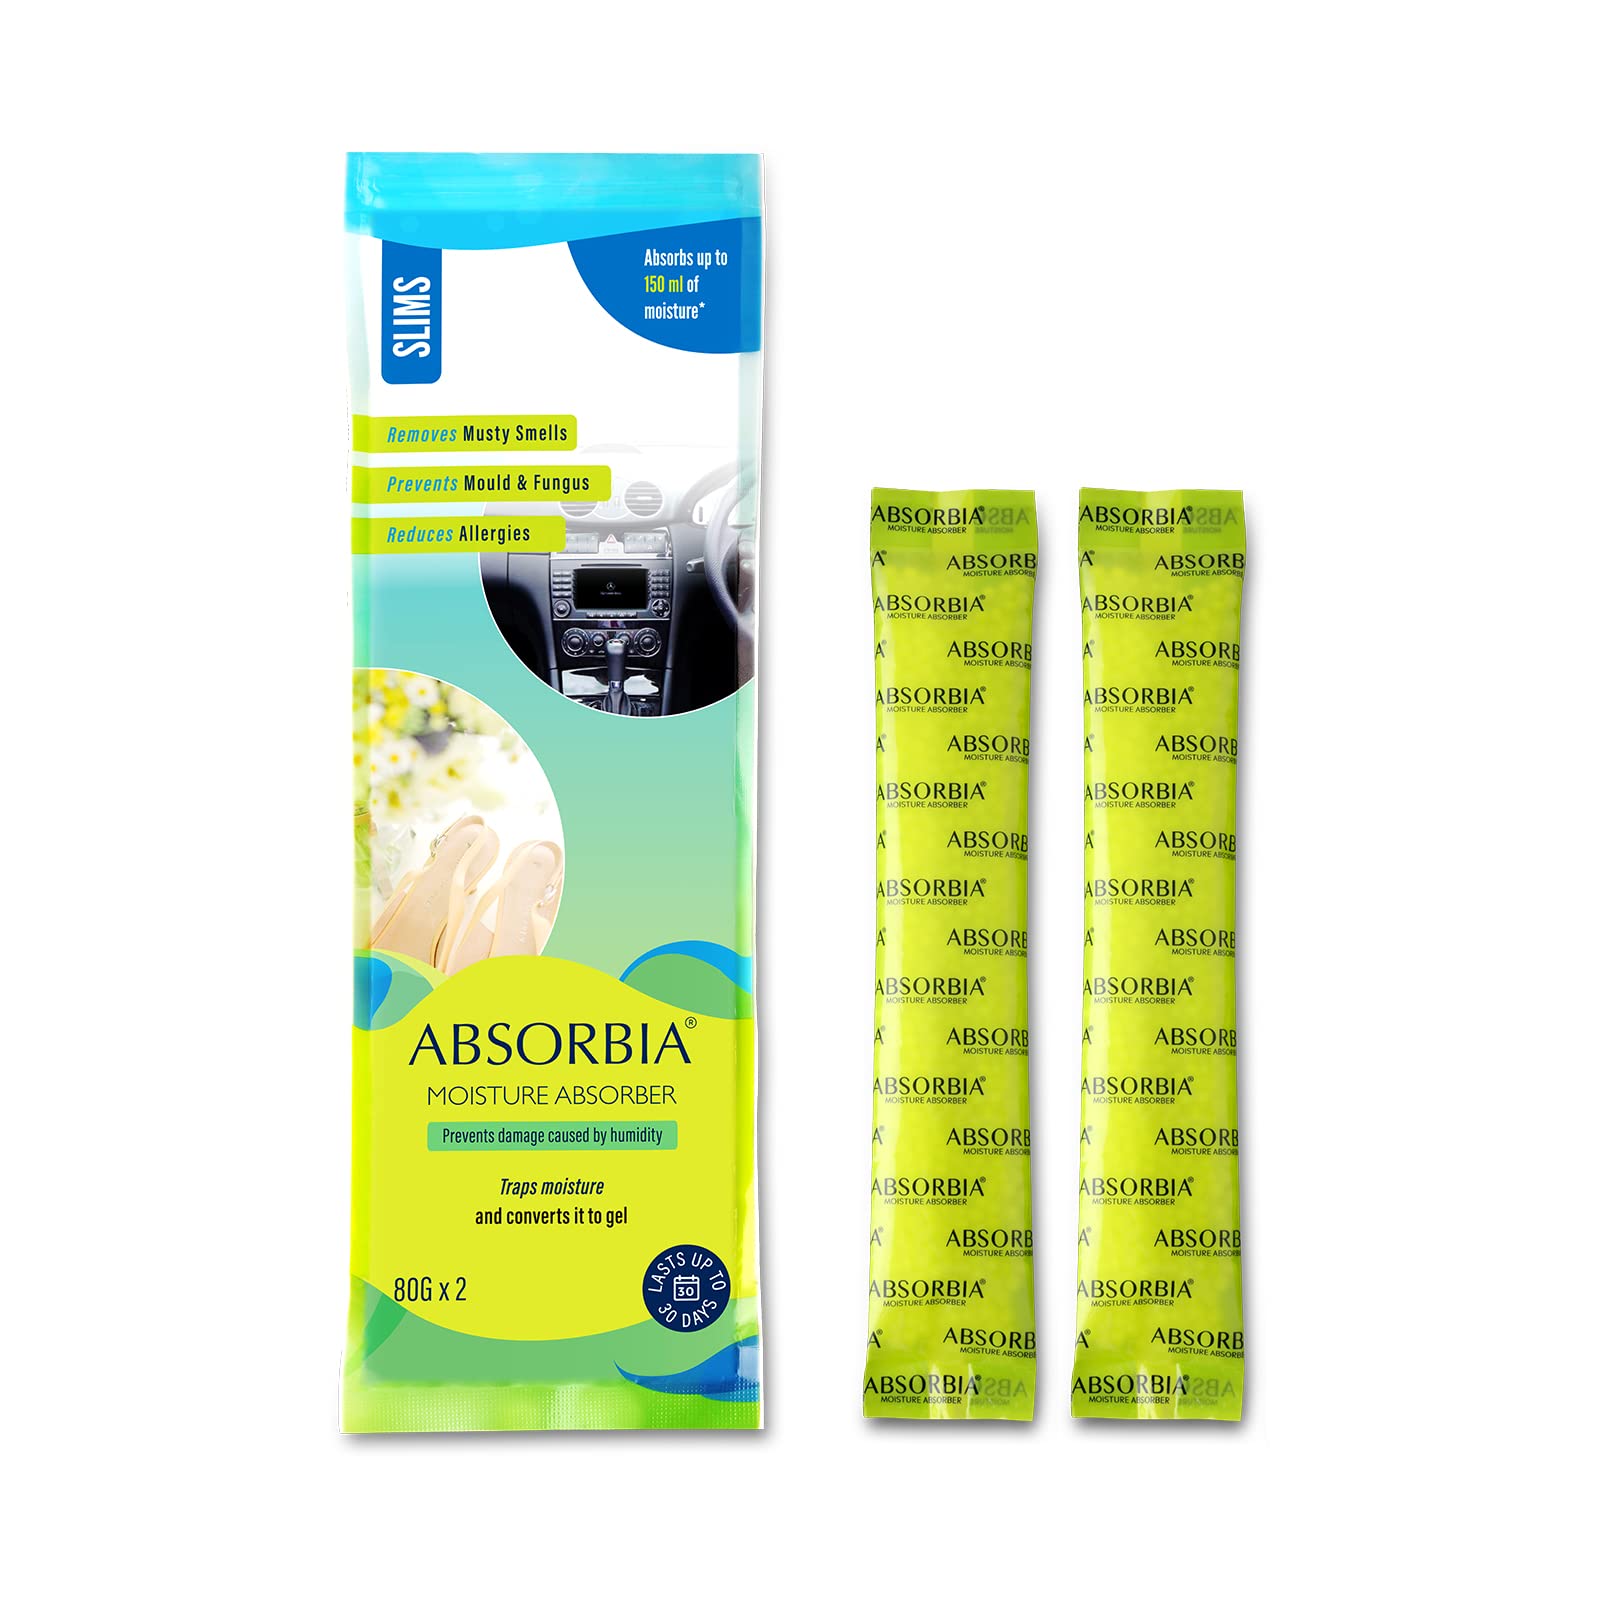 Absorbia Moisture Absorber | Absorbia Slim Sachet Pack of 2(80g X 2) | Absorbs 160ml Each | Dehumidifier for Cars, Drawers, Bed boxes & Shoe Racks| Fights Against Mould, Fungus & Musty smells…